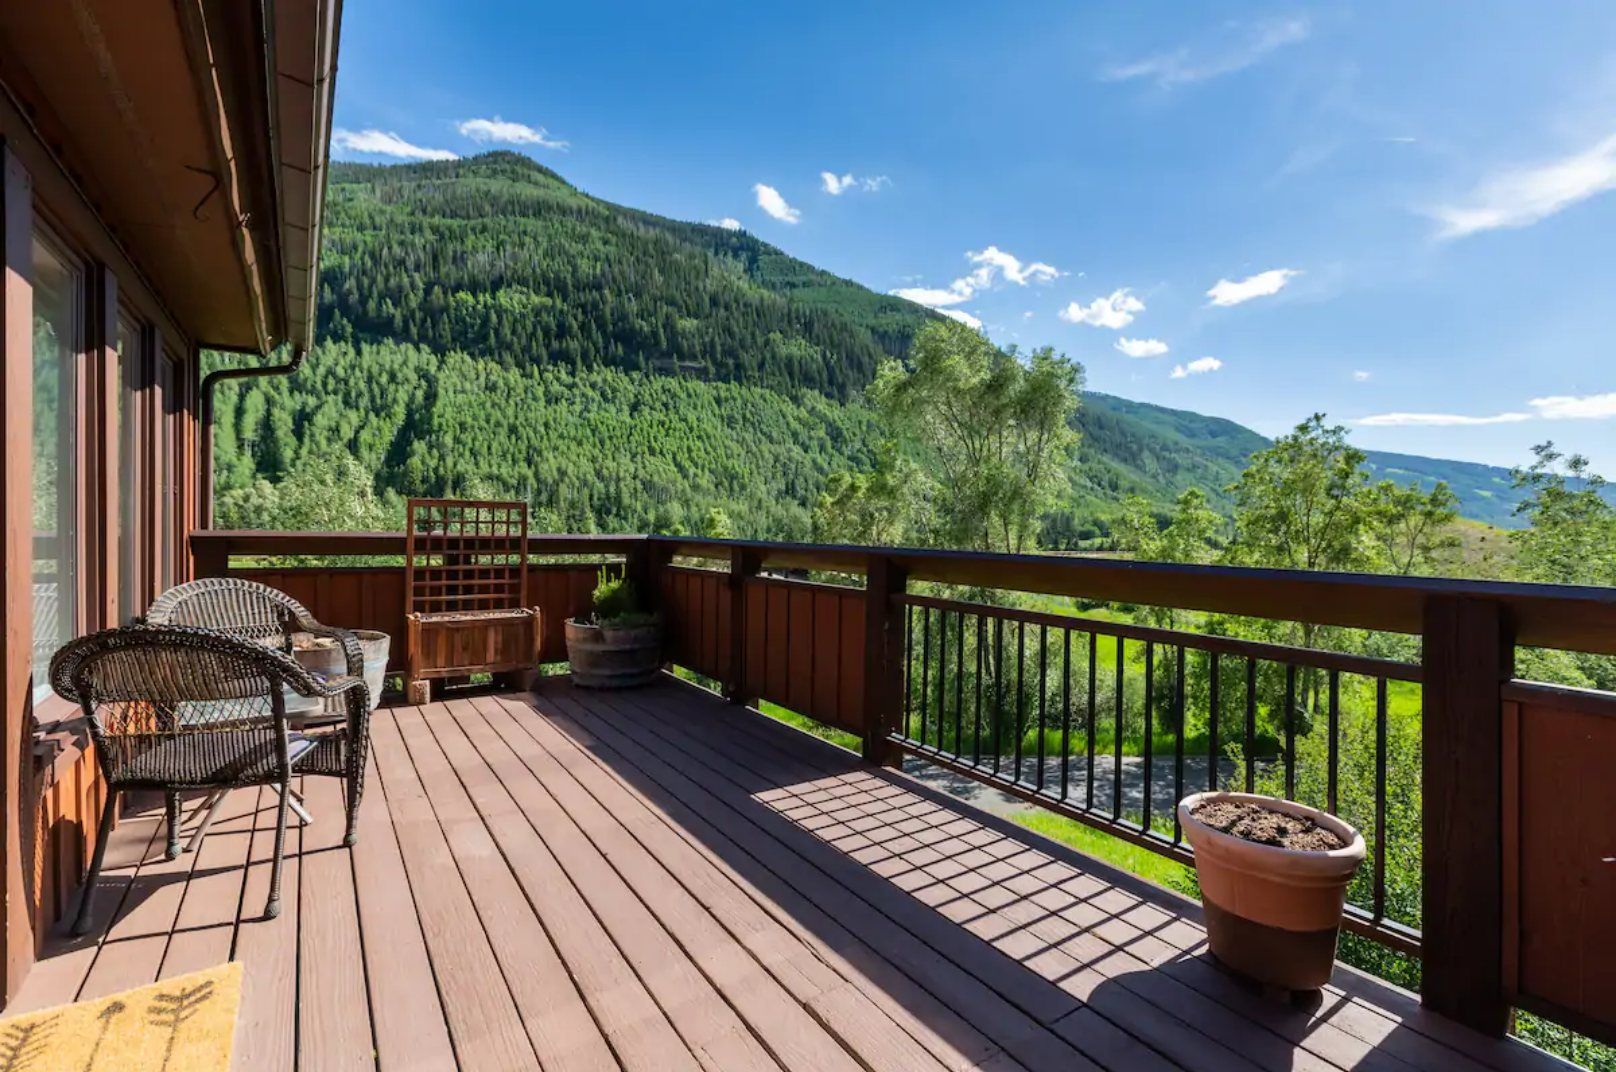 The Best Airbnbs in Vail, Colorado